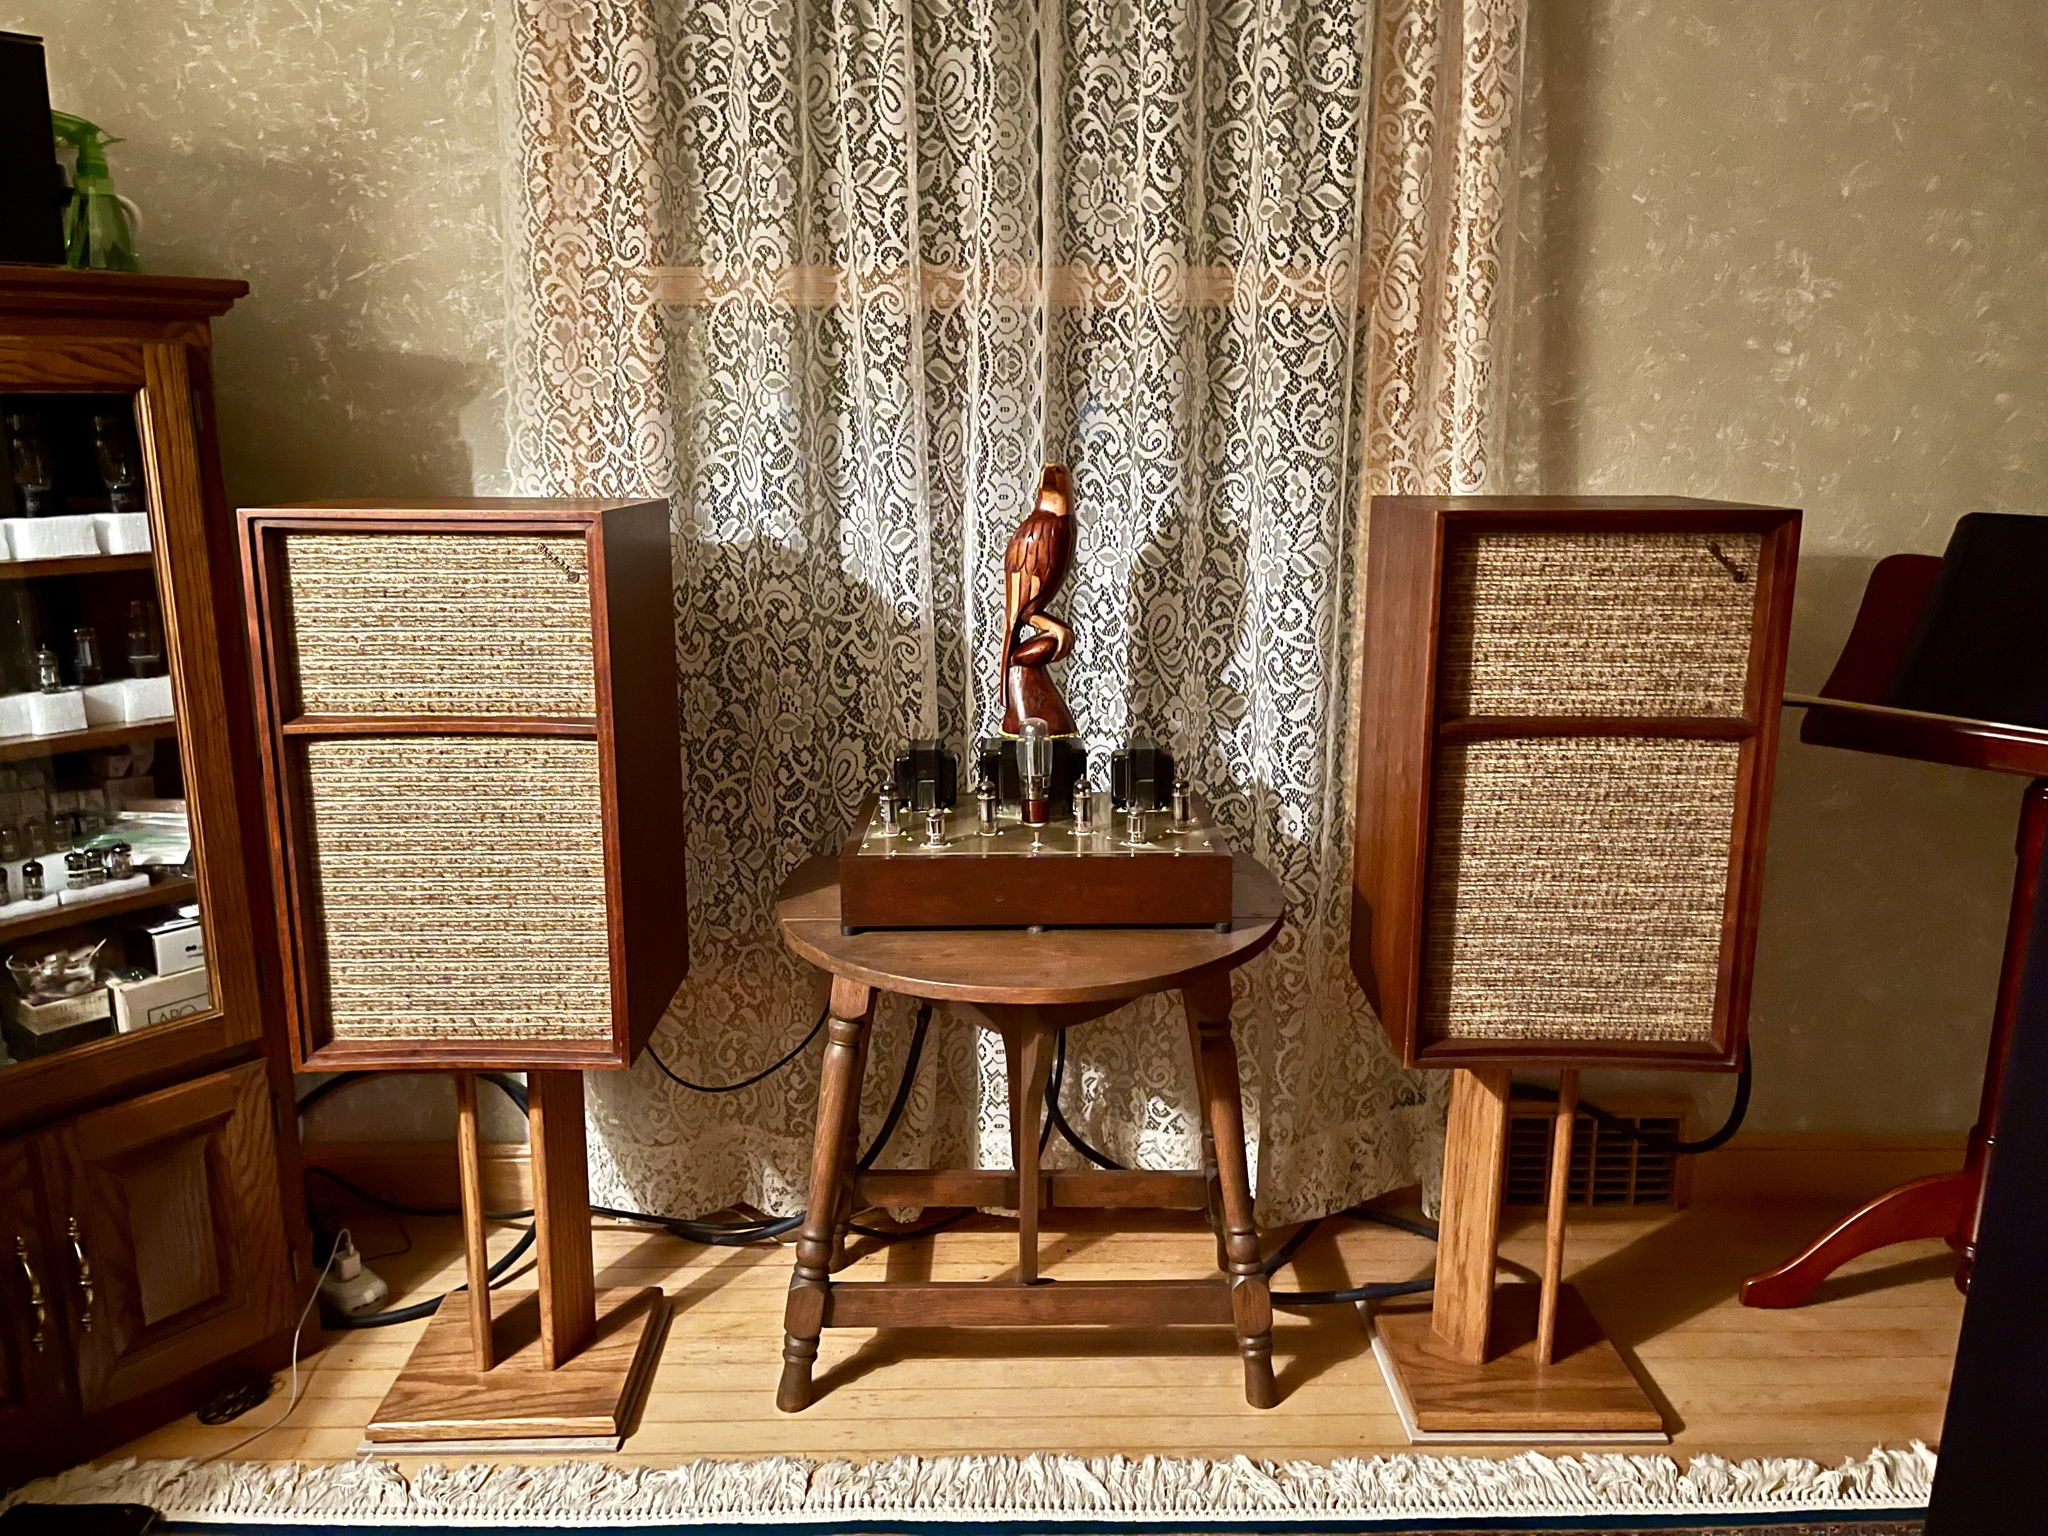 My Vintage Wharfedales W-60's with Alnico Drivers used in my third all vintage system